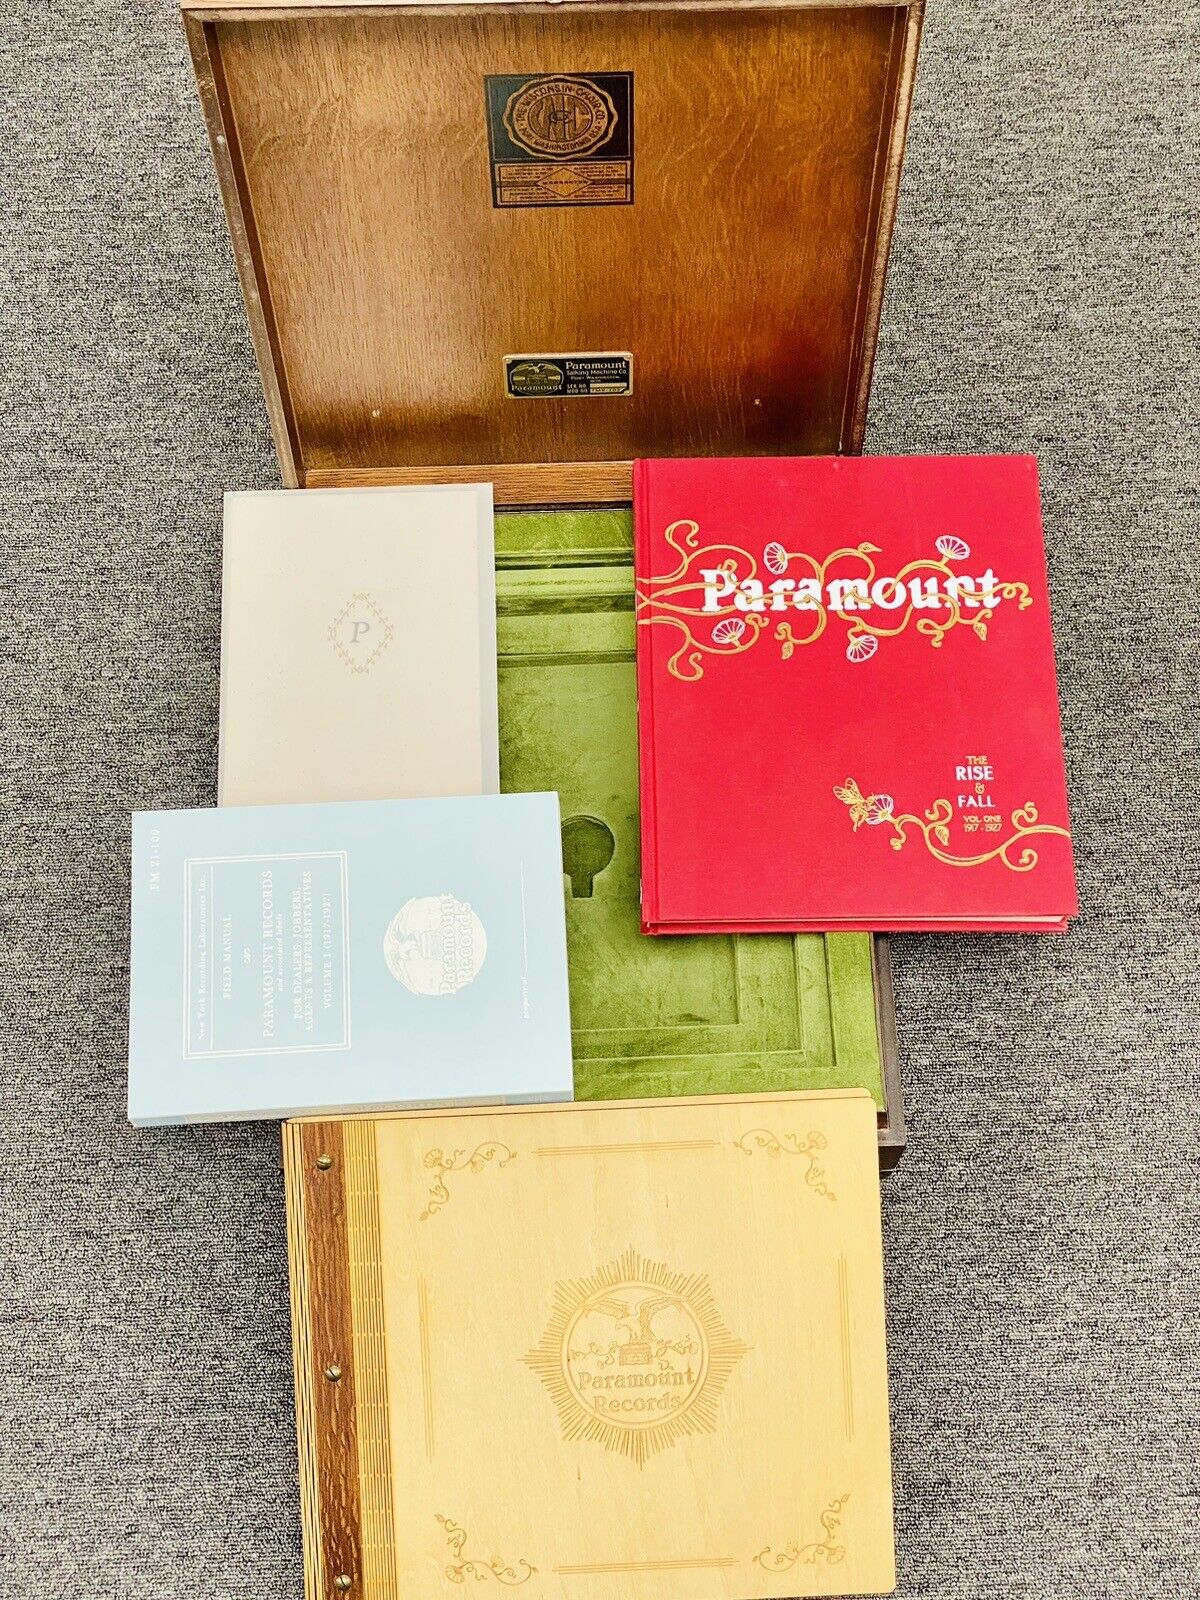 The Rise And Fall Of Paramount Records- Wooden Box Set- Complete- MINT